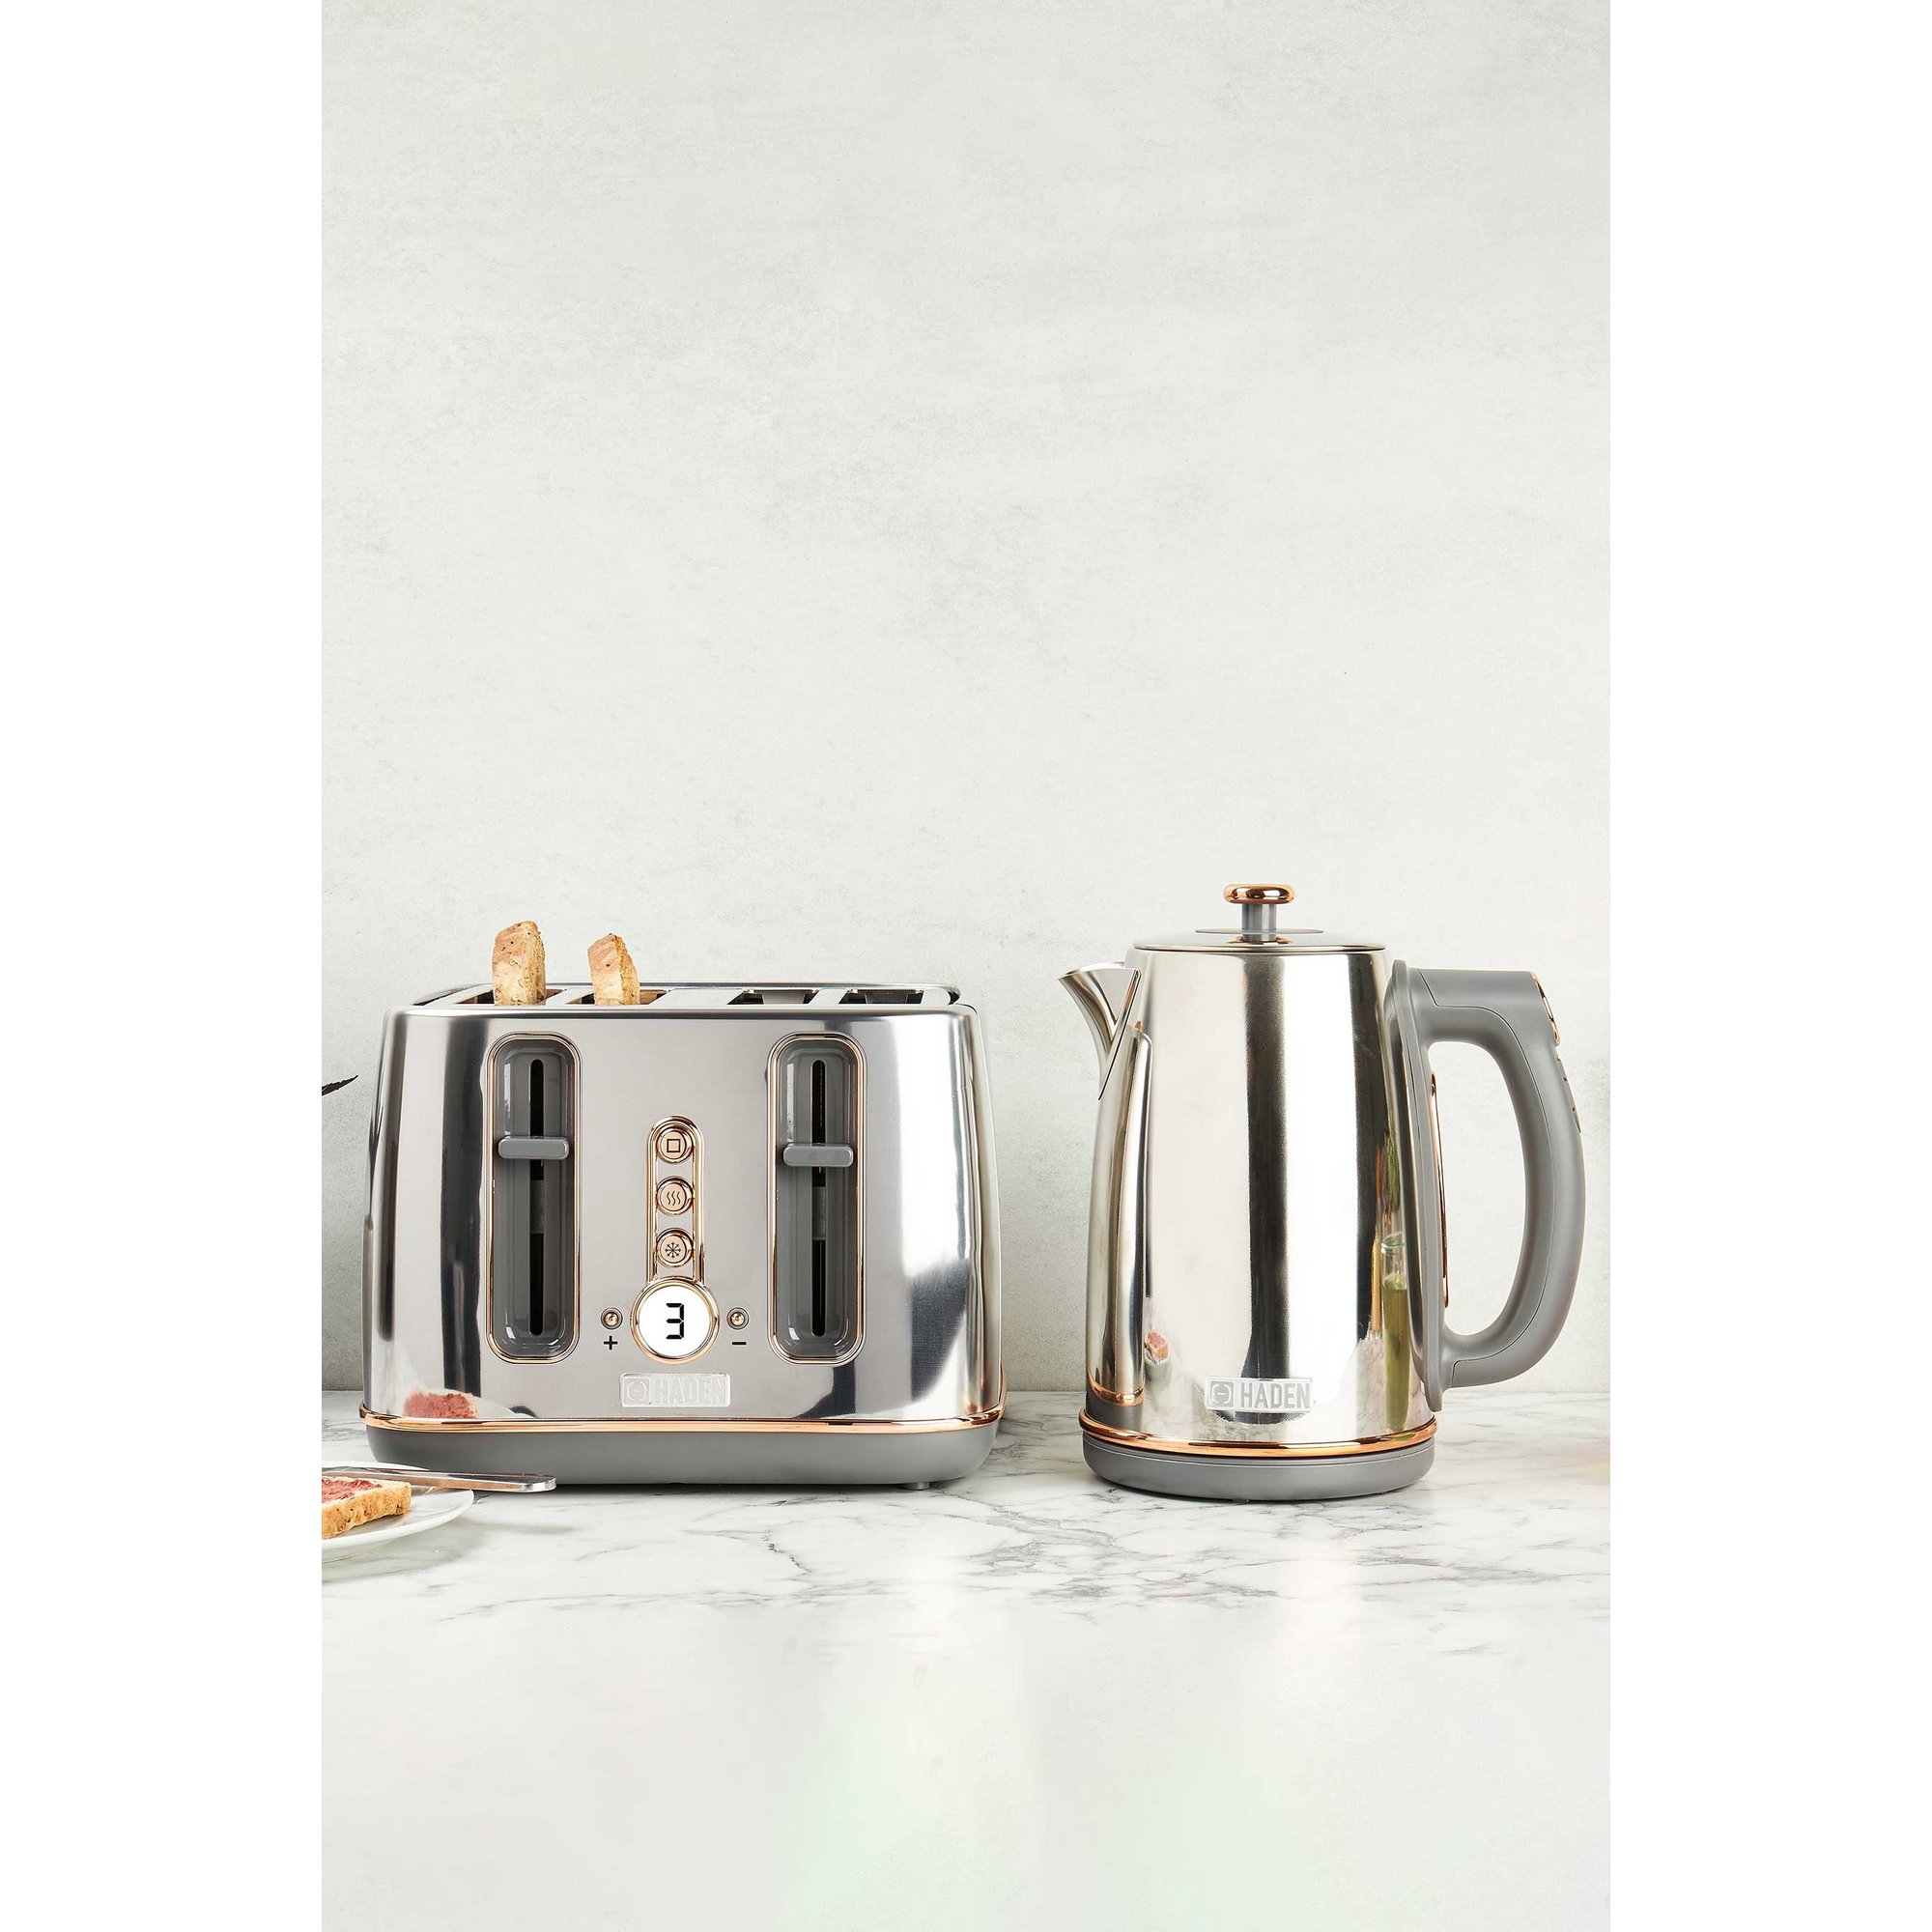 Haden Dorchester Chrome and Rose Gold Kettle 4 Slice Toaster Twin Pack